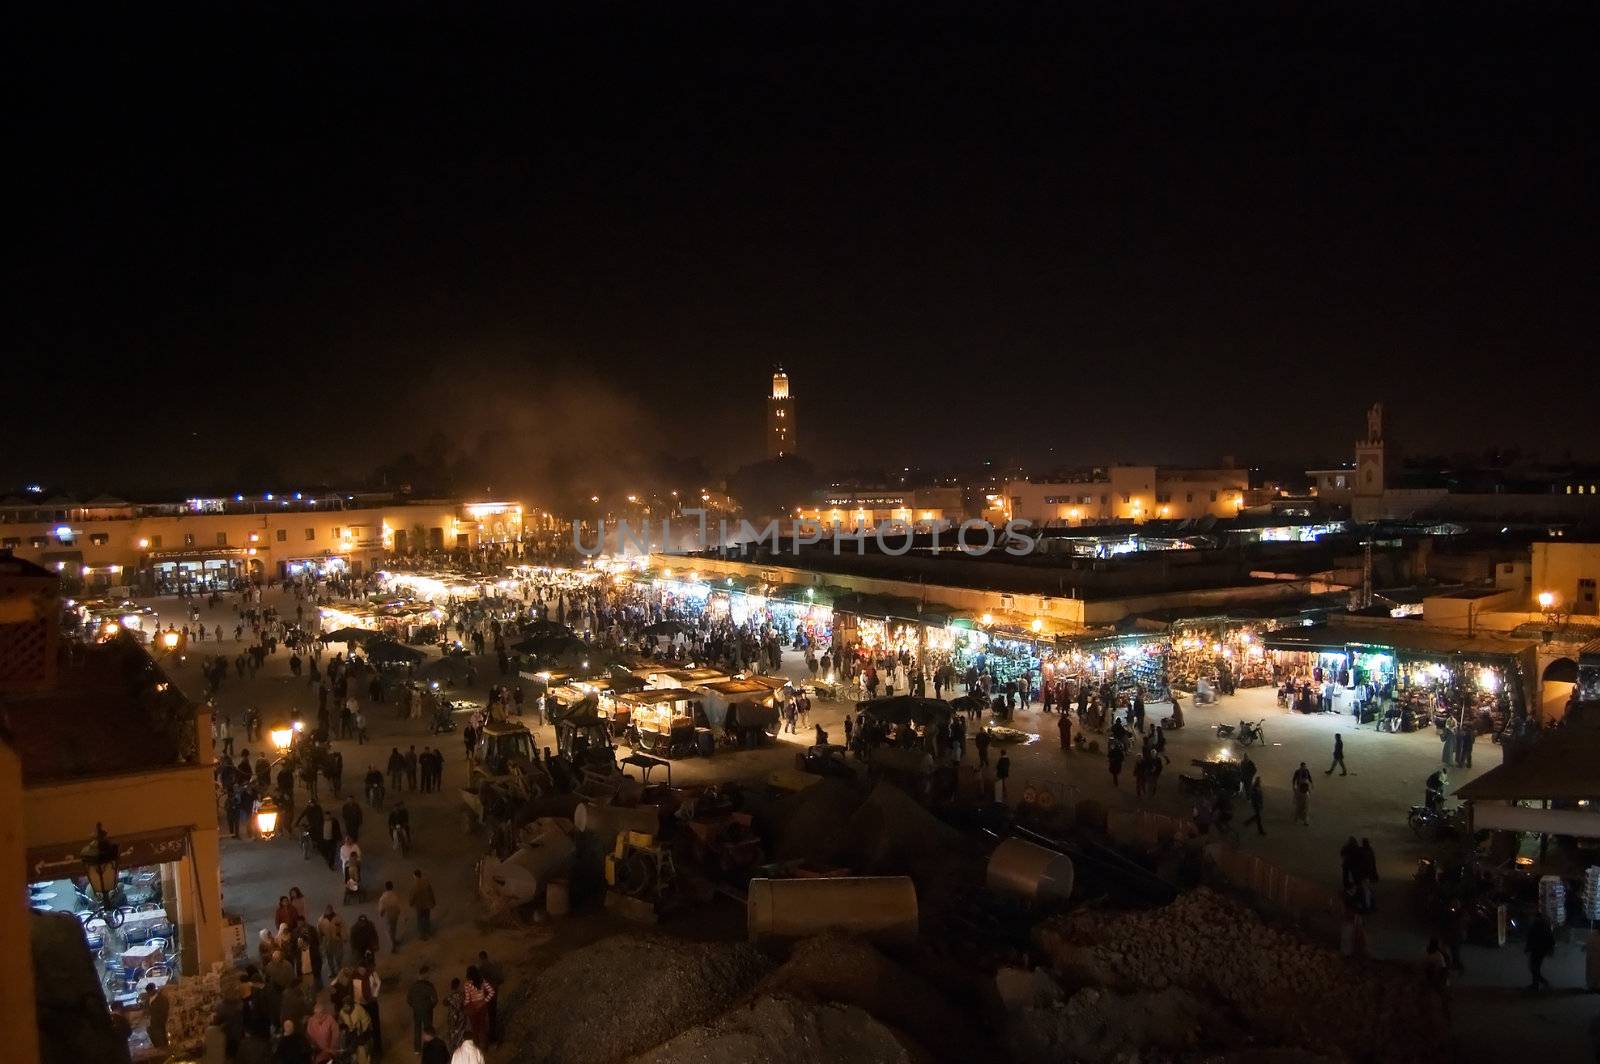 The heart of Marrakesh, Djemaa el Fna square, in a crowdy night